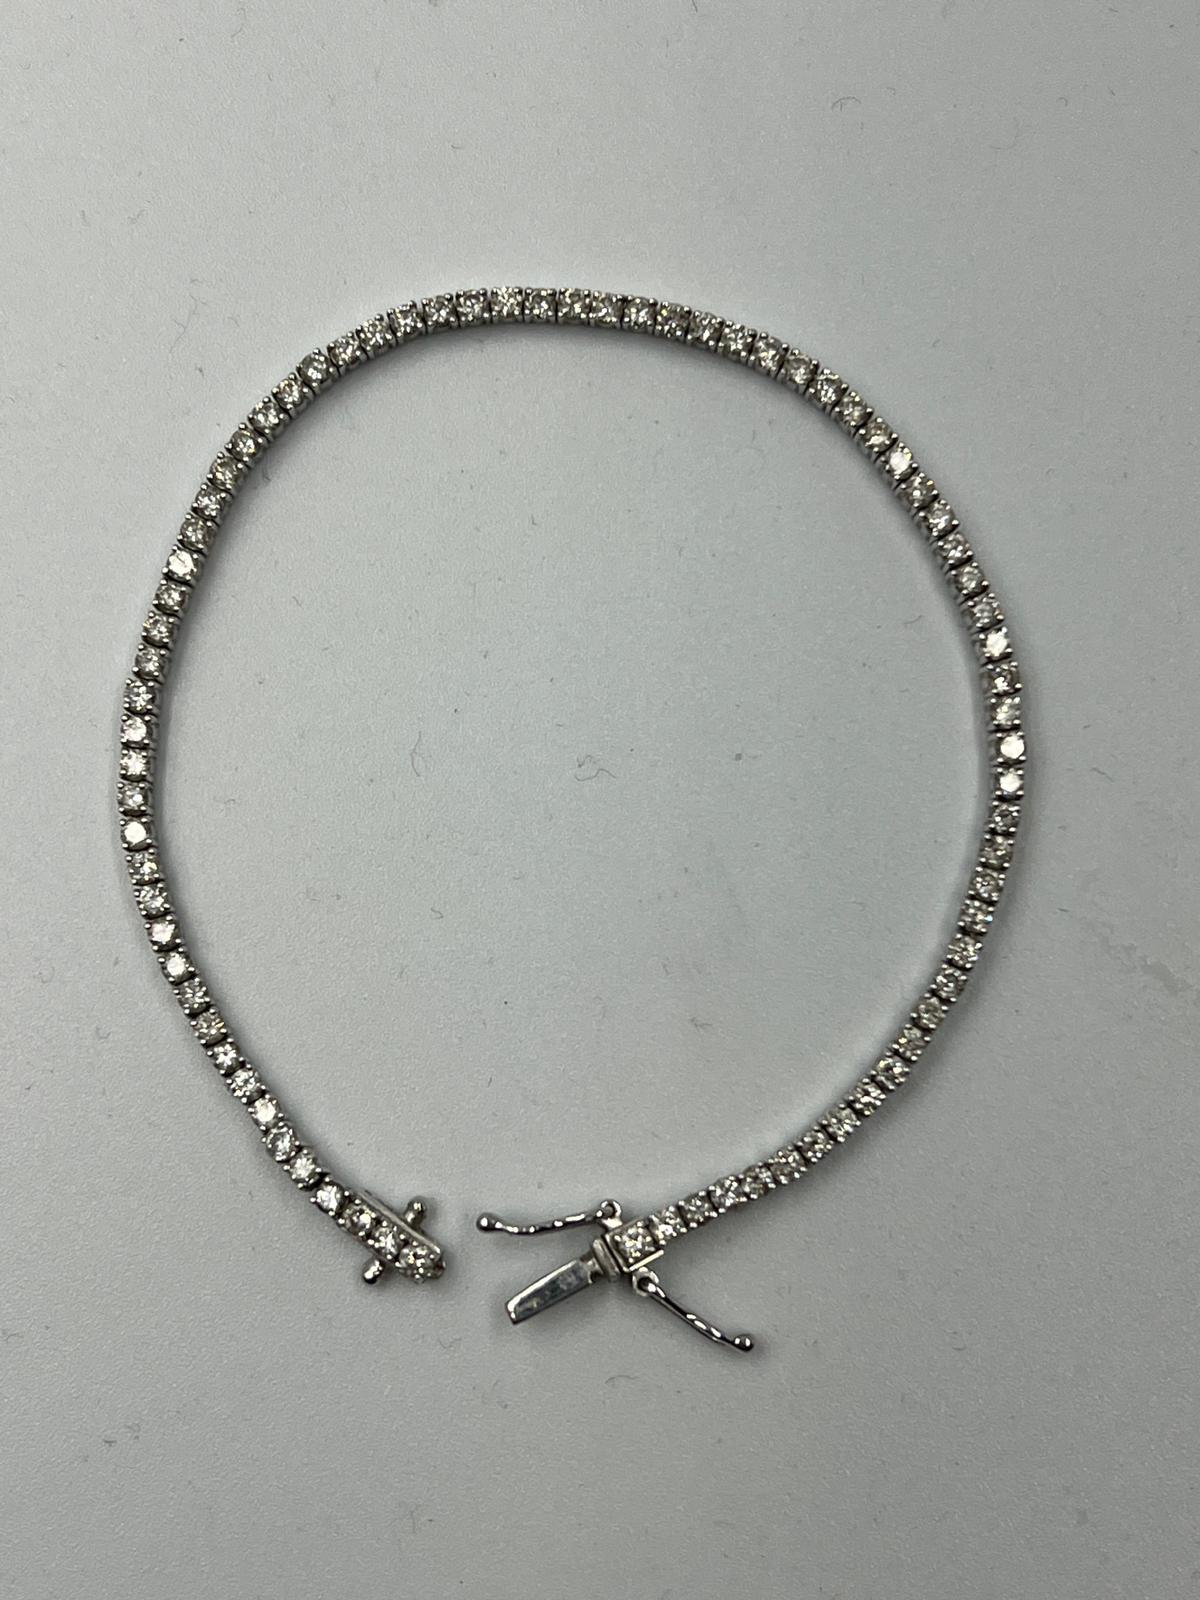 An 18ct white gold Tennis or line bracelet set with approximately 3ct of diamonds. - Image 4 of 25